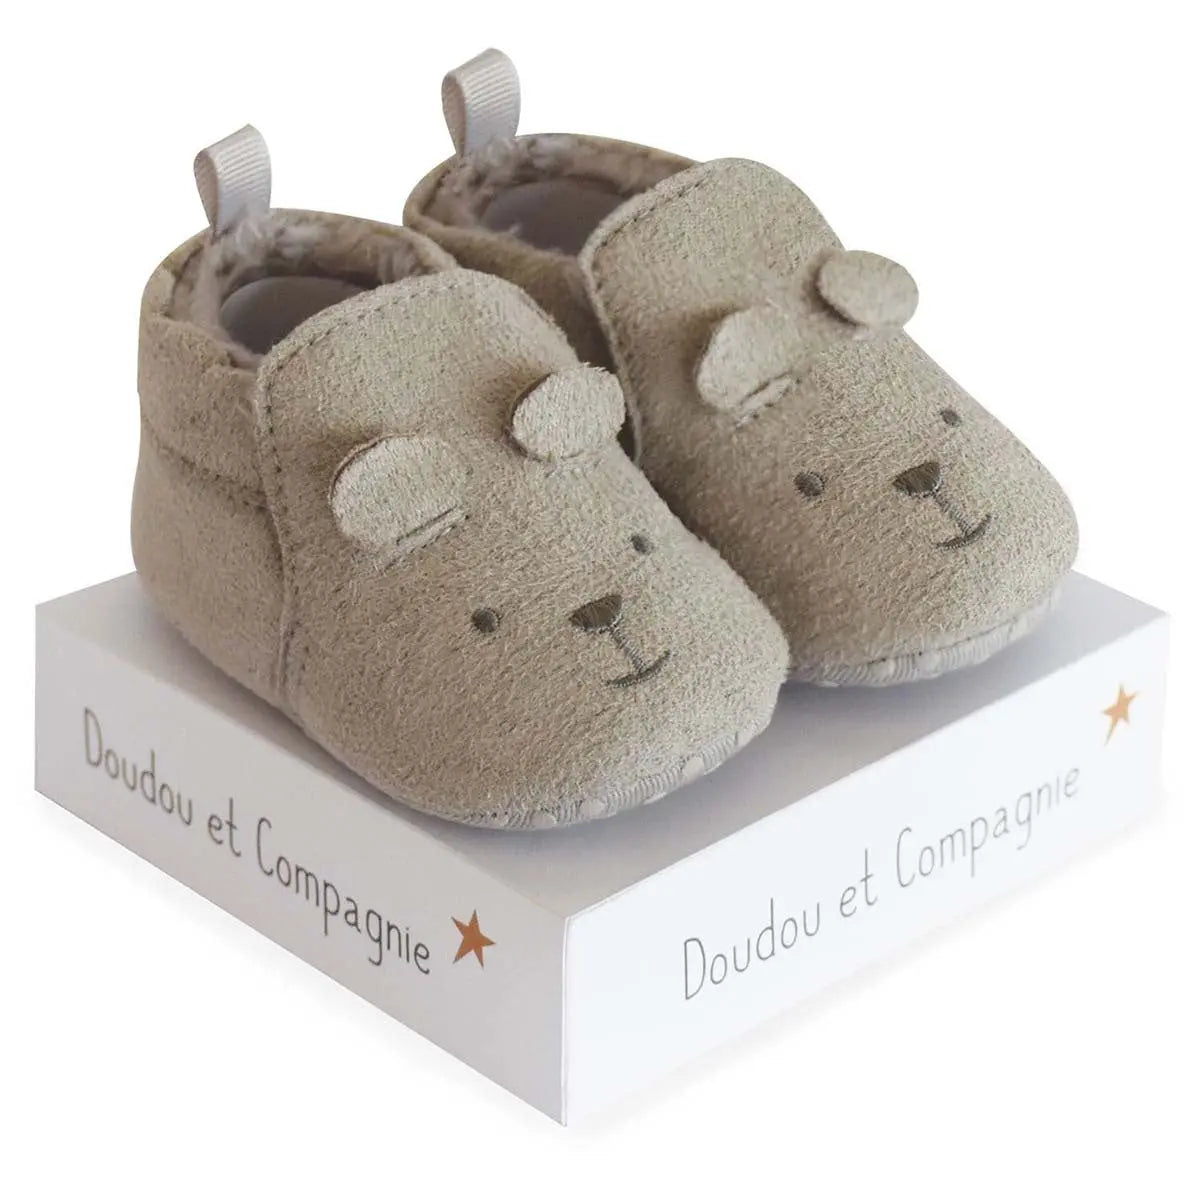 Baby booties - grey teddy-Booties, mittens & hats-Doudou Compagnie-Blue Almonds-London-South Kensington